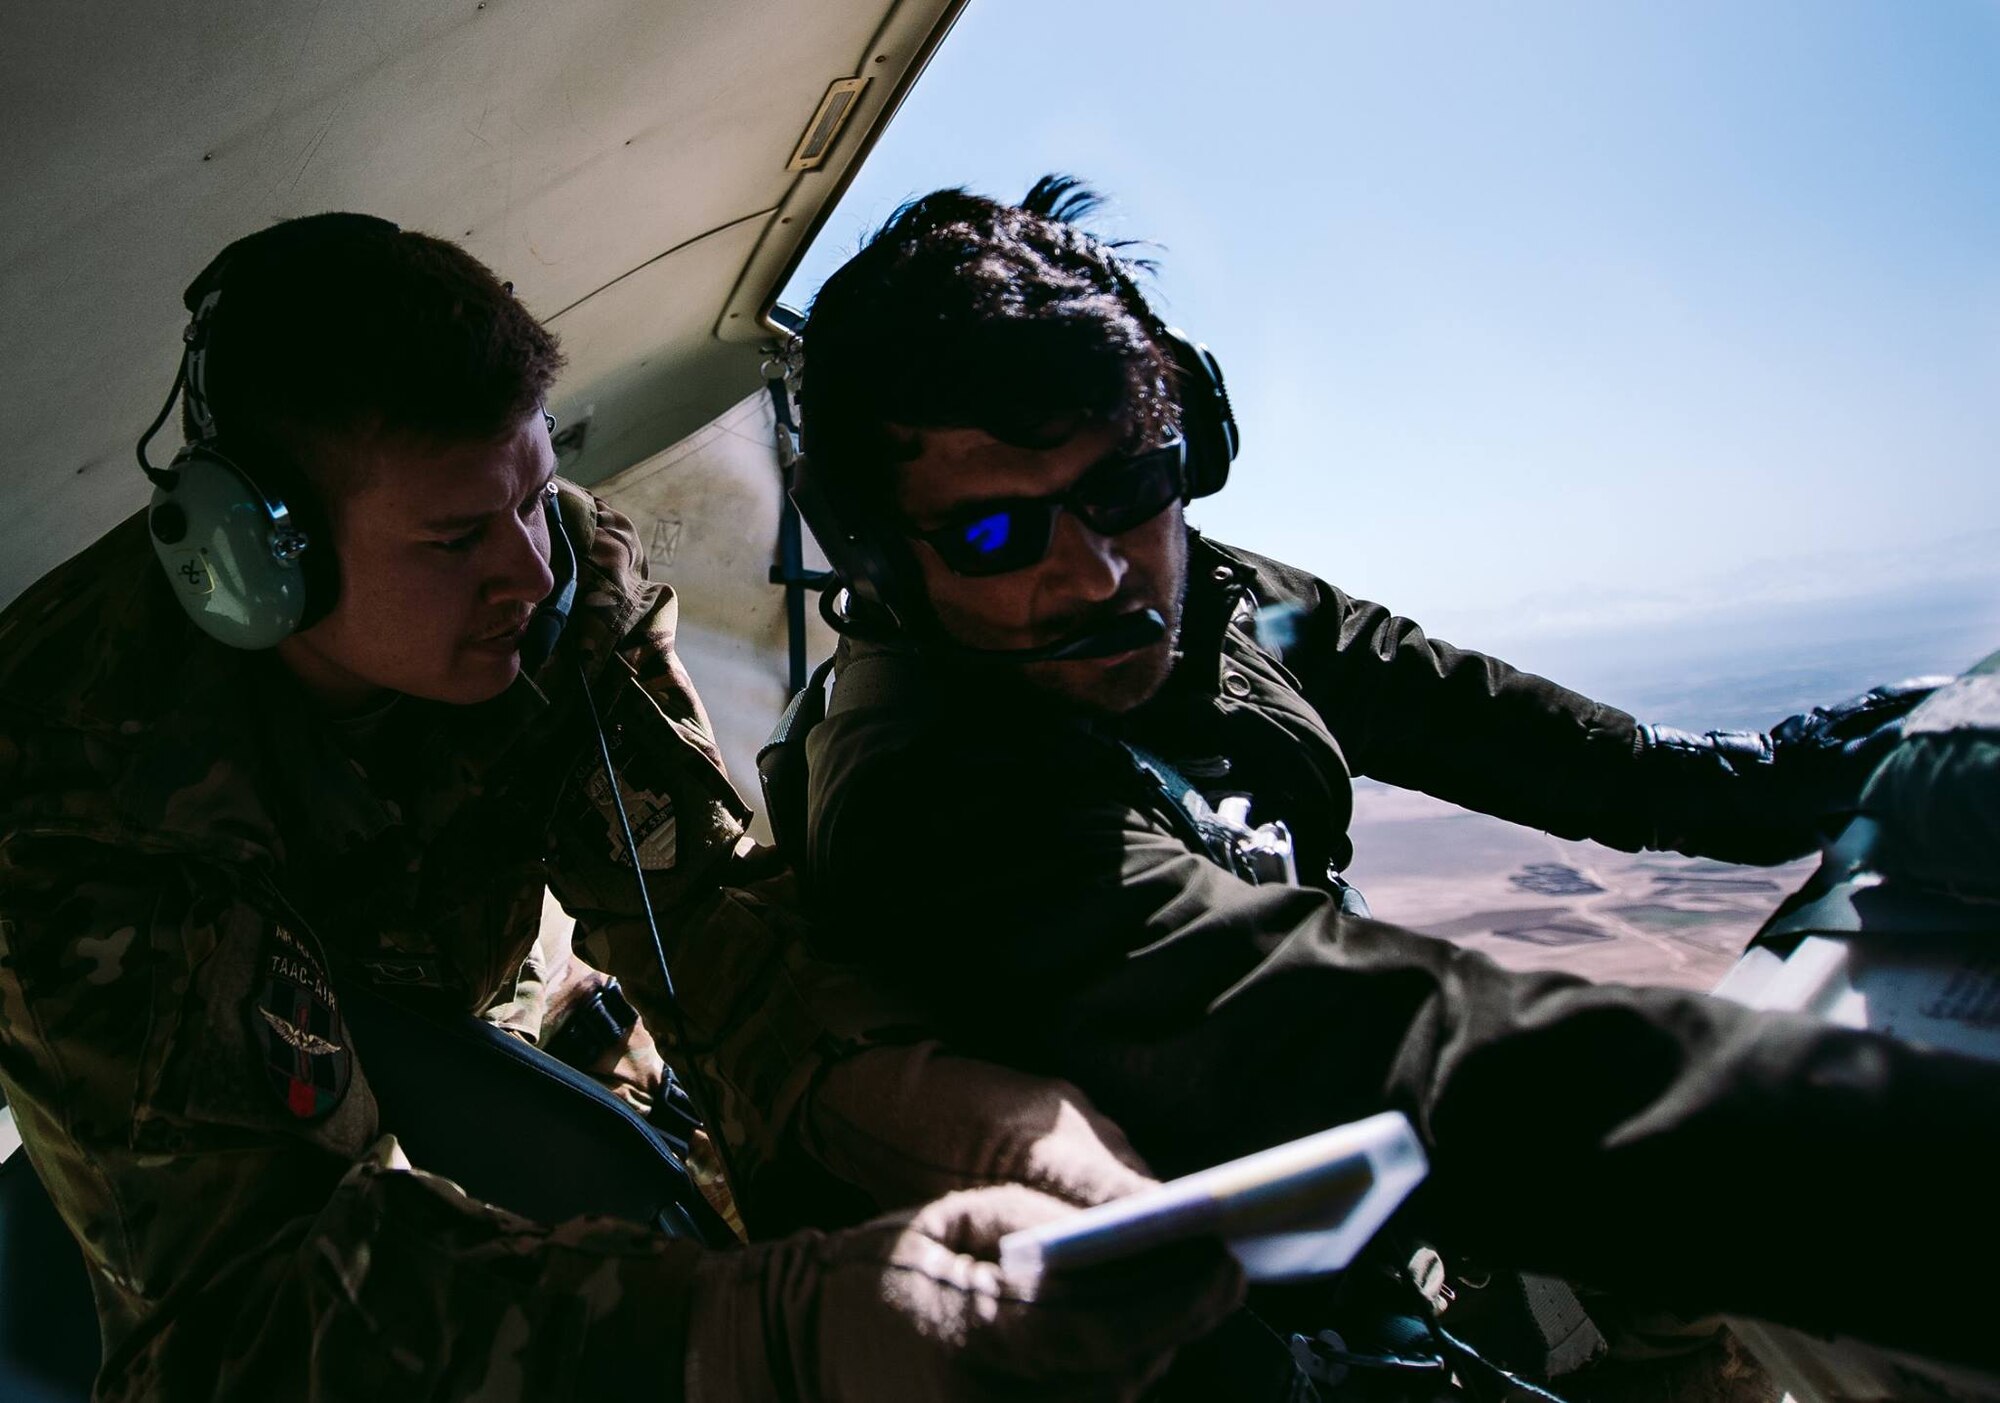 U.S. Air Force Tech. Sgt. Brian Wahl with the  Train, Advise, Assist Command-Air, as part of Resolute Support Mission, goes through a pre-drop checklist with an Afghan counterpart to practice air drops near Kabul, Afghanistan, March 19, 2017. The TAAC-Air advisors foster working relationships and fortify confidence in the mission. (U.S. Air Force photo by Senior Airman Jordan Castelan)